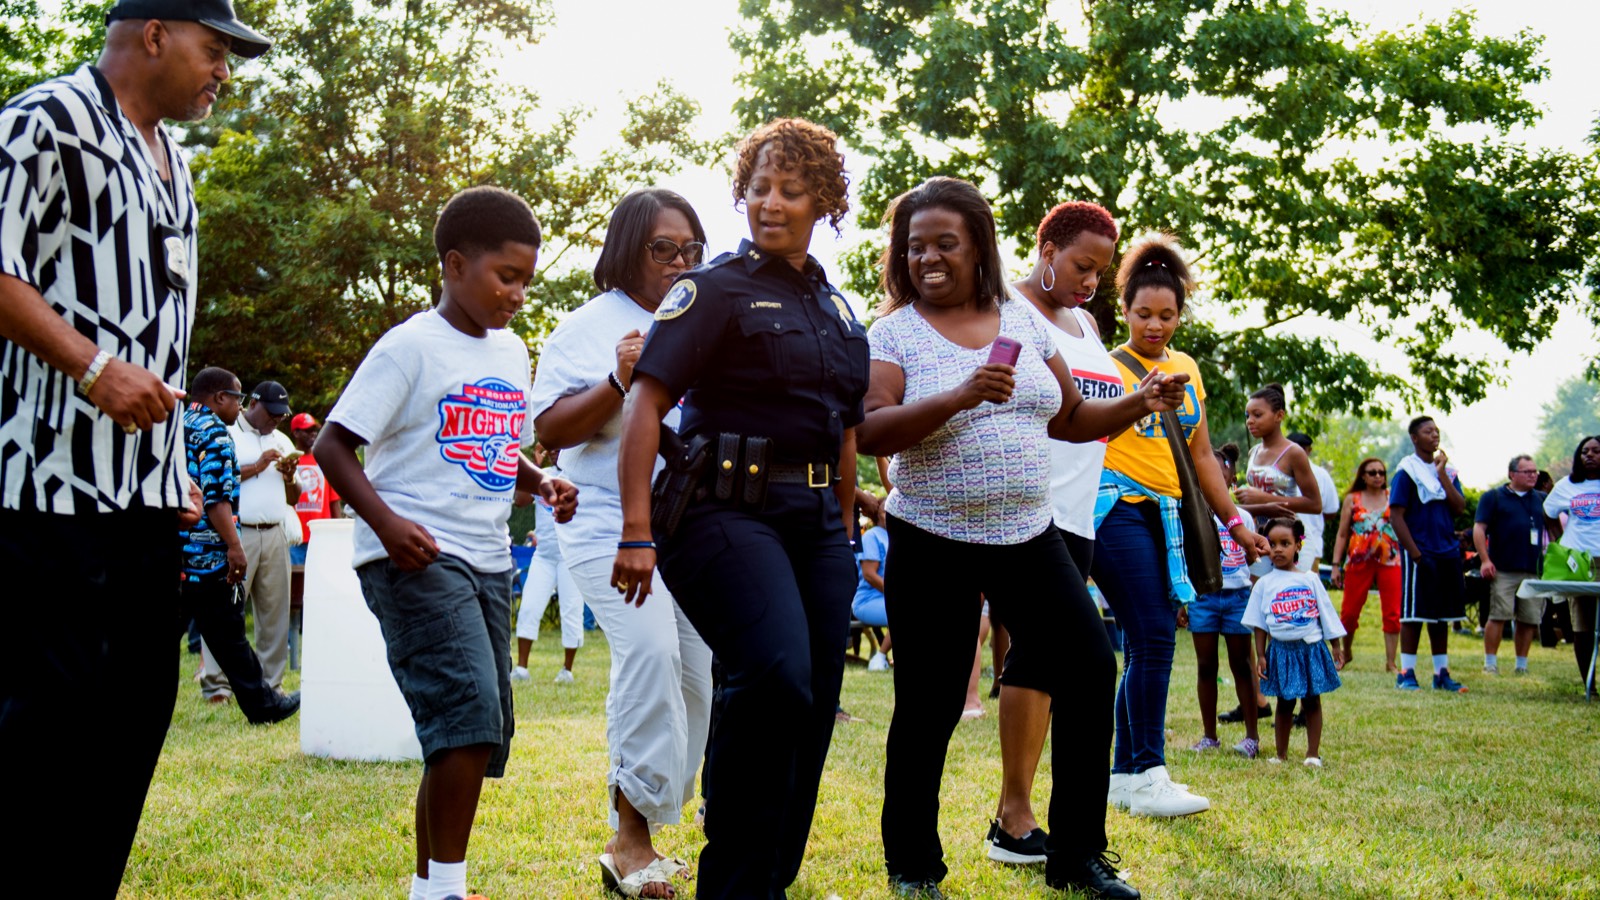 About National Night Out